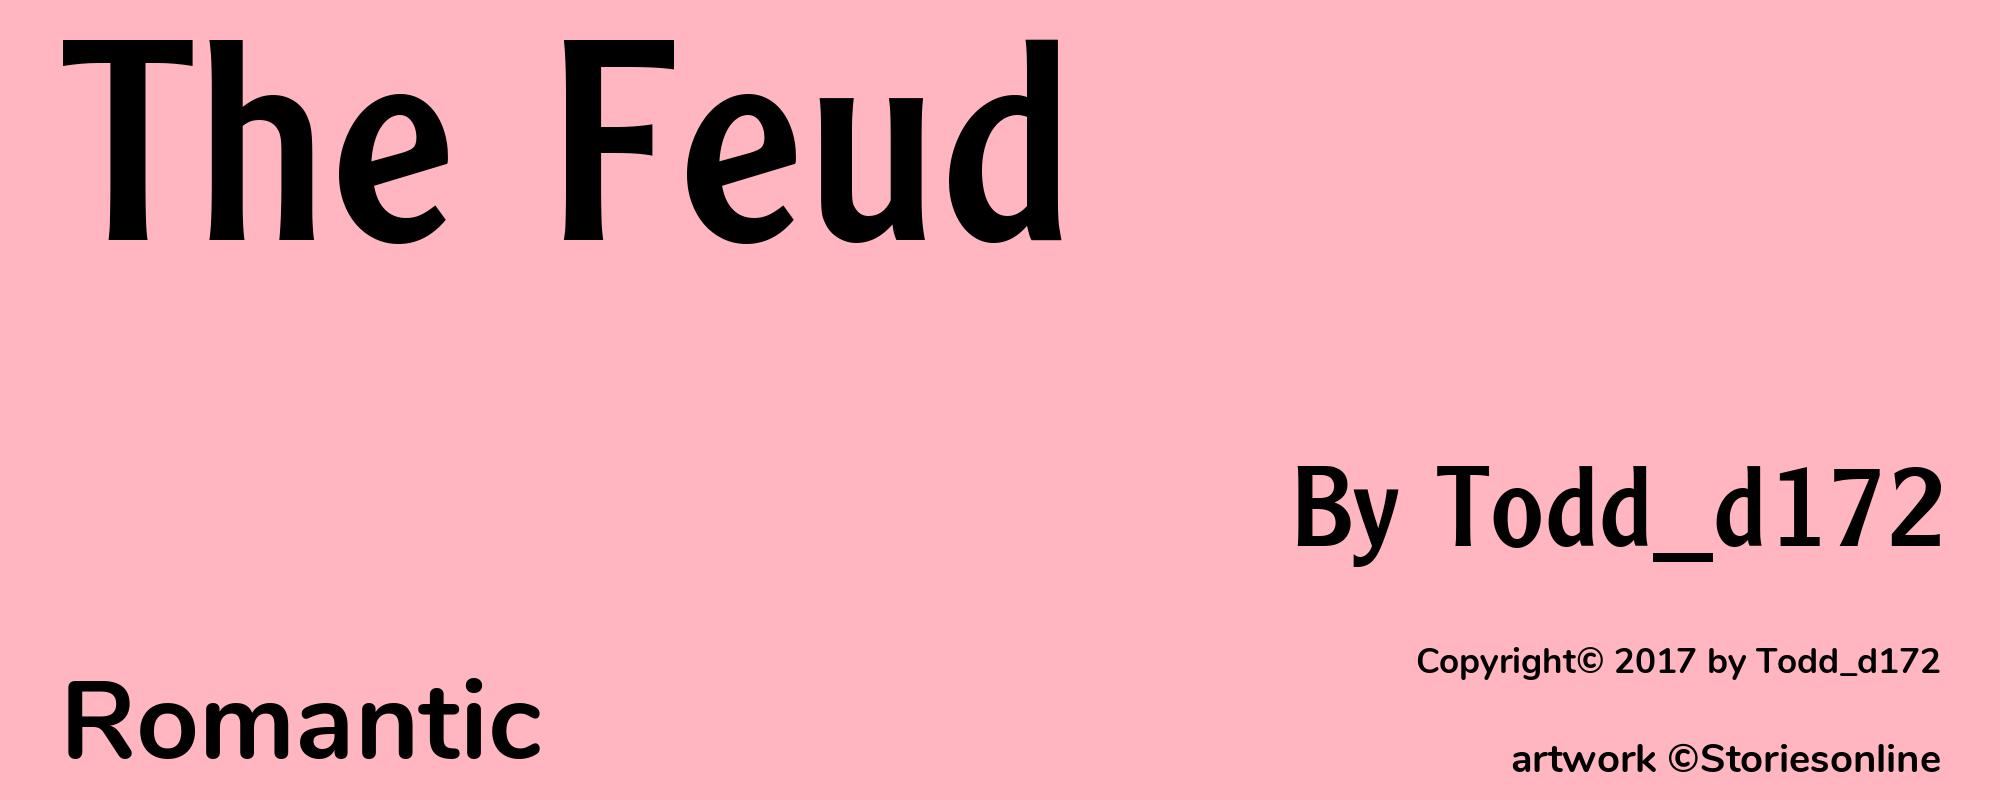 The Feud - Cover